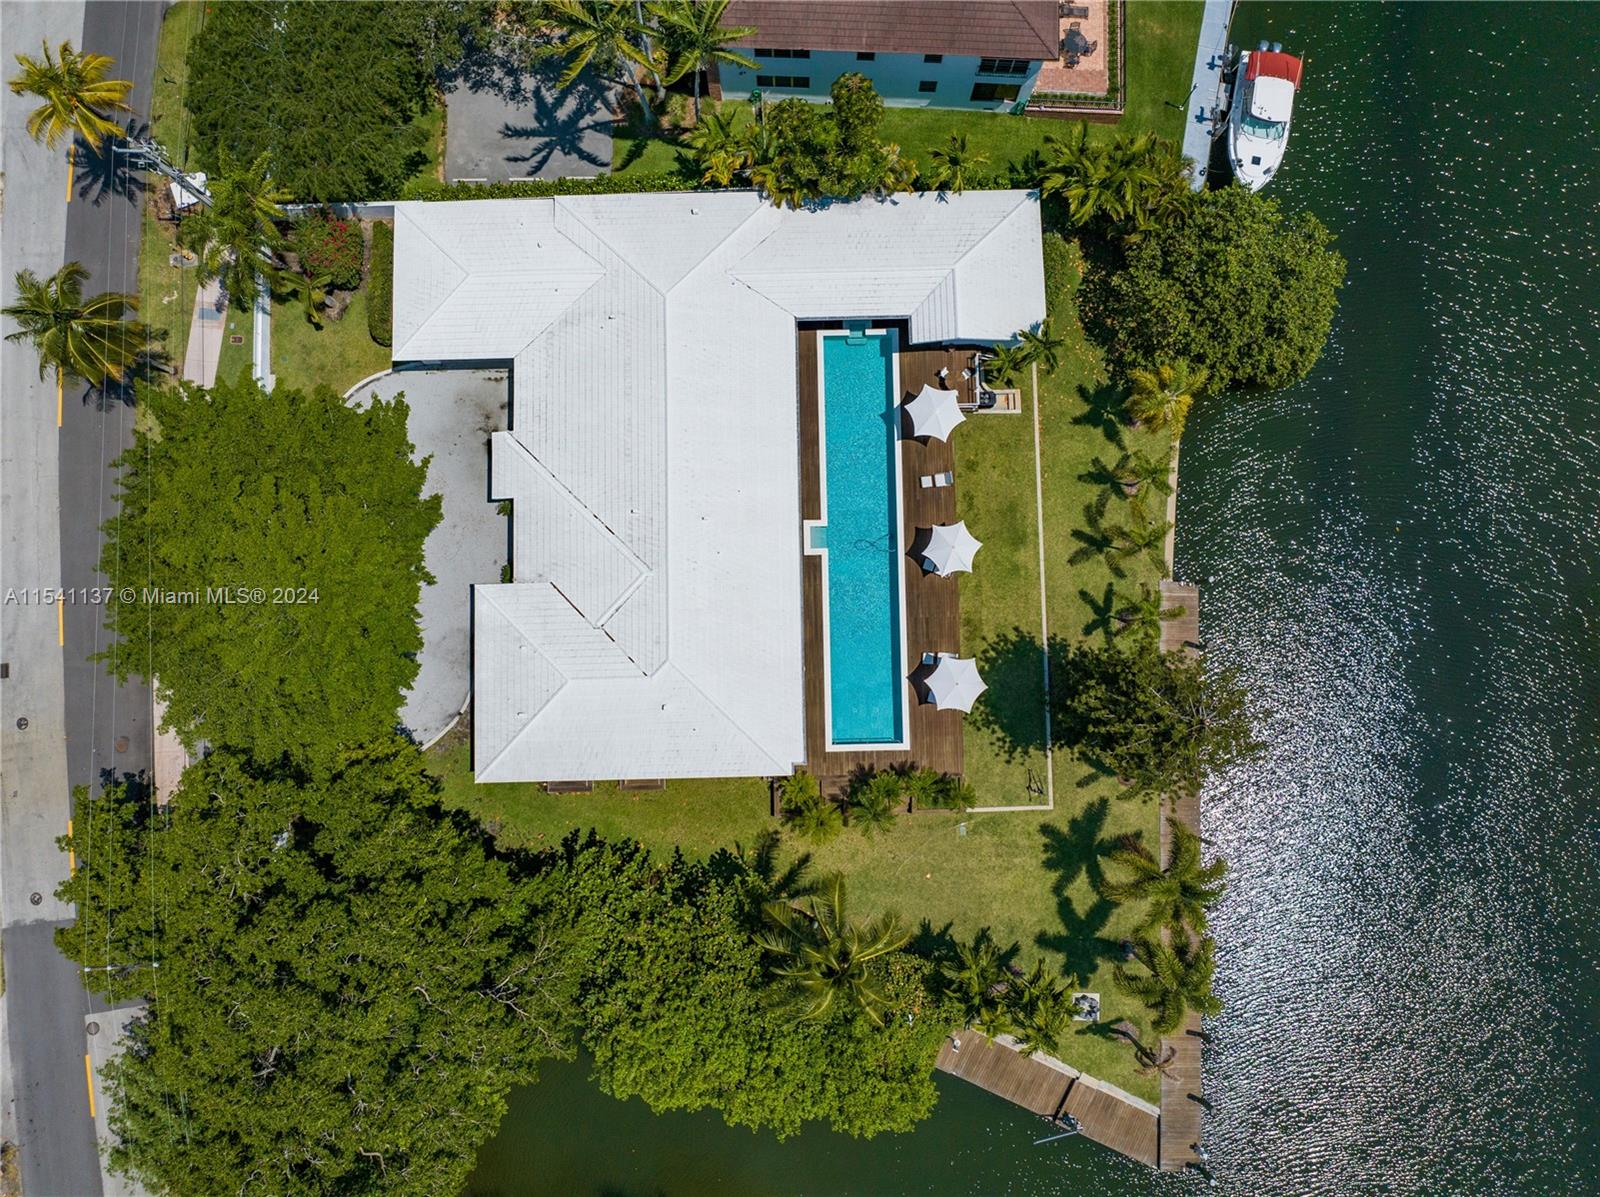 Coral Gables Waterway Gem, Renovated. Actual Living Space 4,817 and 22,000 Lot as per Plans. Wide Canal, 100’ Dock facing North, 40' Dock East, dock 2013 renovated. This is a dream home for any Angler. Bridge clearance 18' Height, 15 min. to Intercoastal. A renovated home using the most selective materials such as Onyx, Quartz, Exquisite Marble, European Hardware, Quartz Counter tops. Kitchen is for the Chef in mind, 4 Thermador Column Style Refrigerators, Freezer, Wine station, 2 Separate Sink Stations, and Cooking Surfaces, Ovens. Service quarters next to kitchen. Adjacent to kitchen, a Chef Table, seats 10. This 6 Bedrooms, 6 1/2 Bathrooms, and Office has a Grand Room and most Bedrooms face the Waterways and the 75’ Pool. Impact windows and doors.